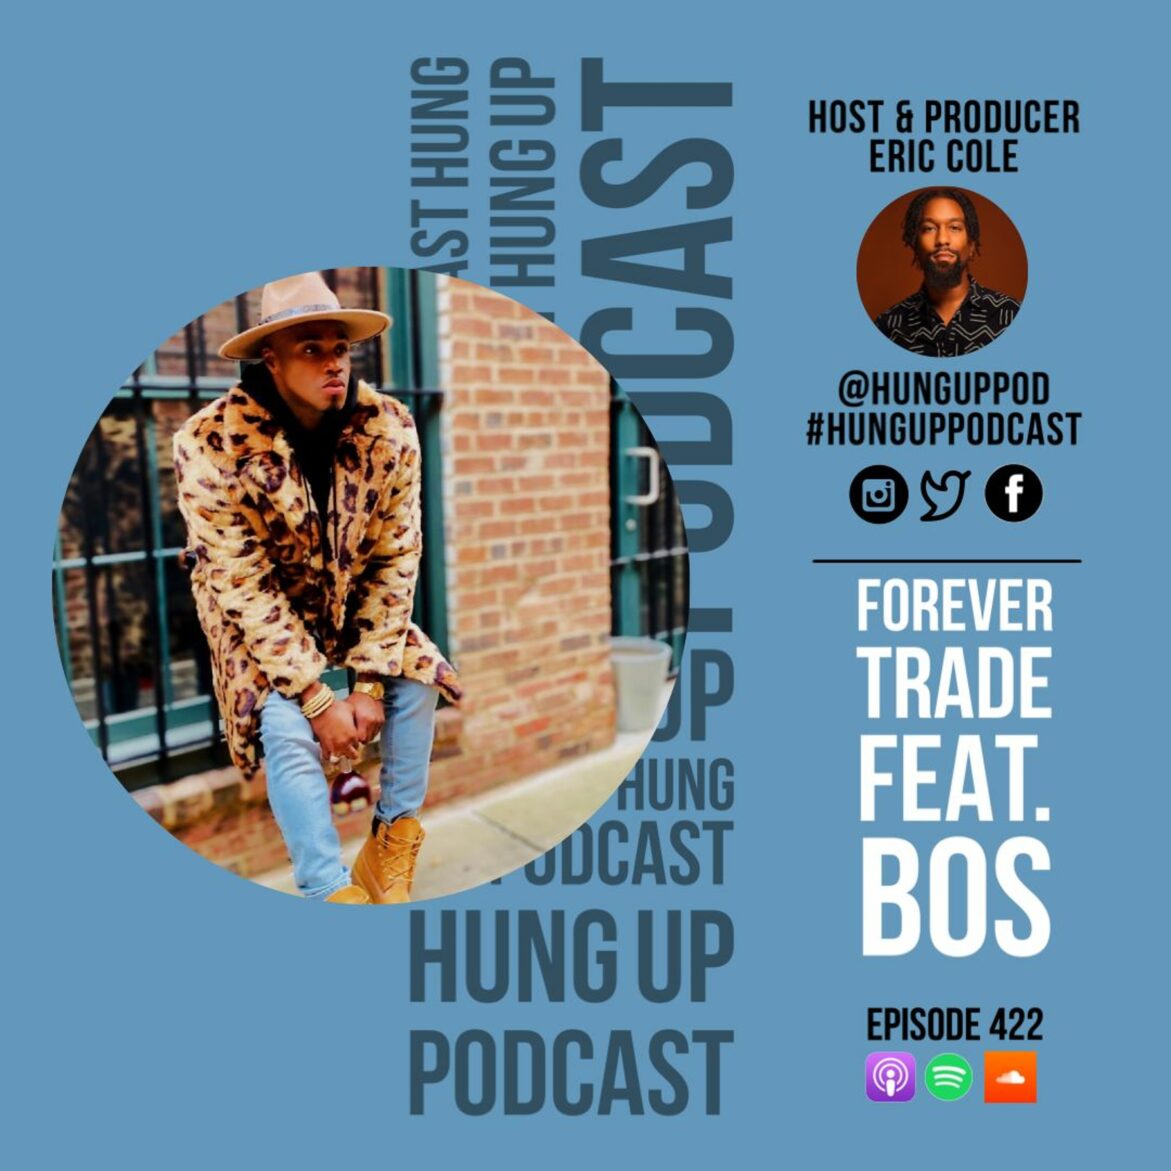 Black Podcasting - Episode 422: Forever Trade Feat. b0s